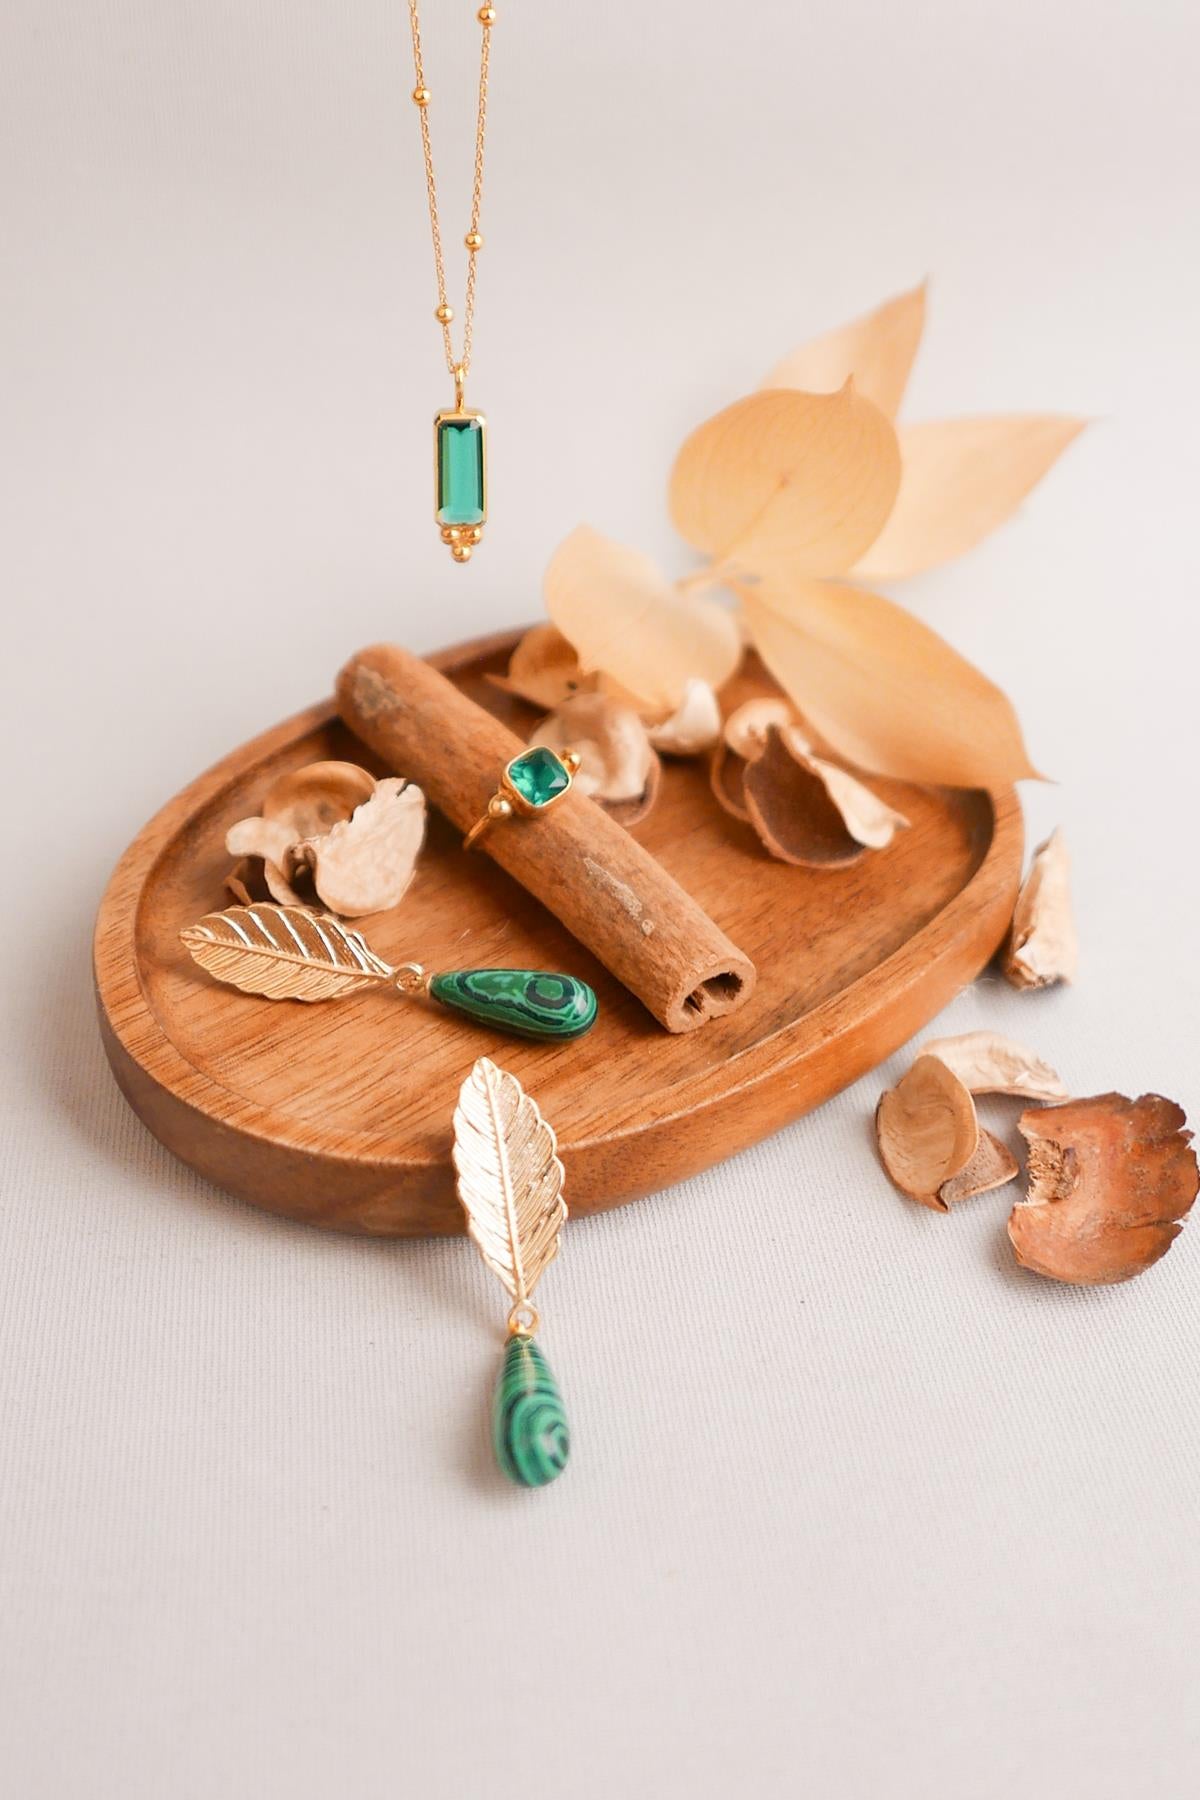 Feather Malachite Stone Earrings Gold Plated